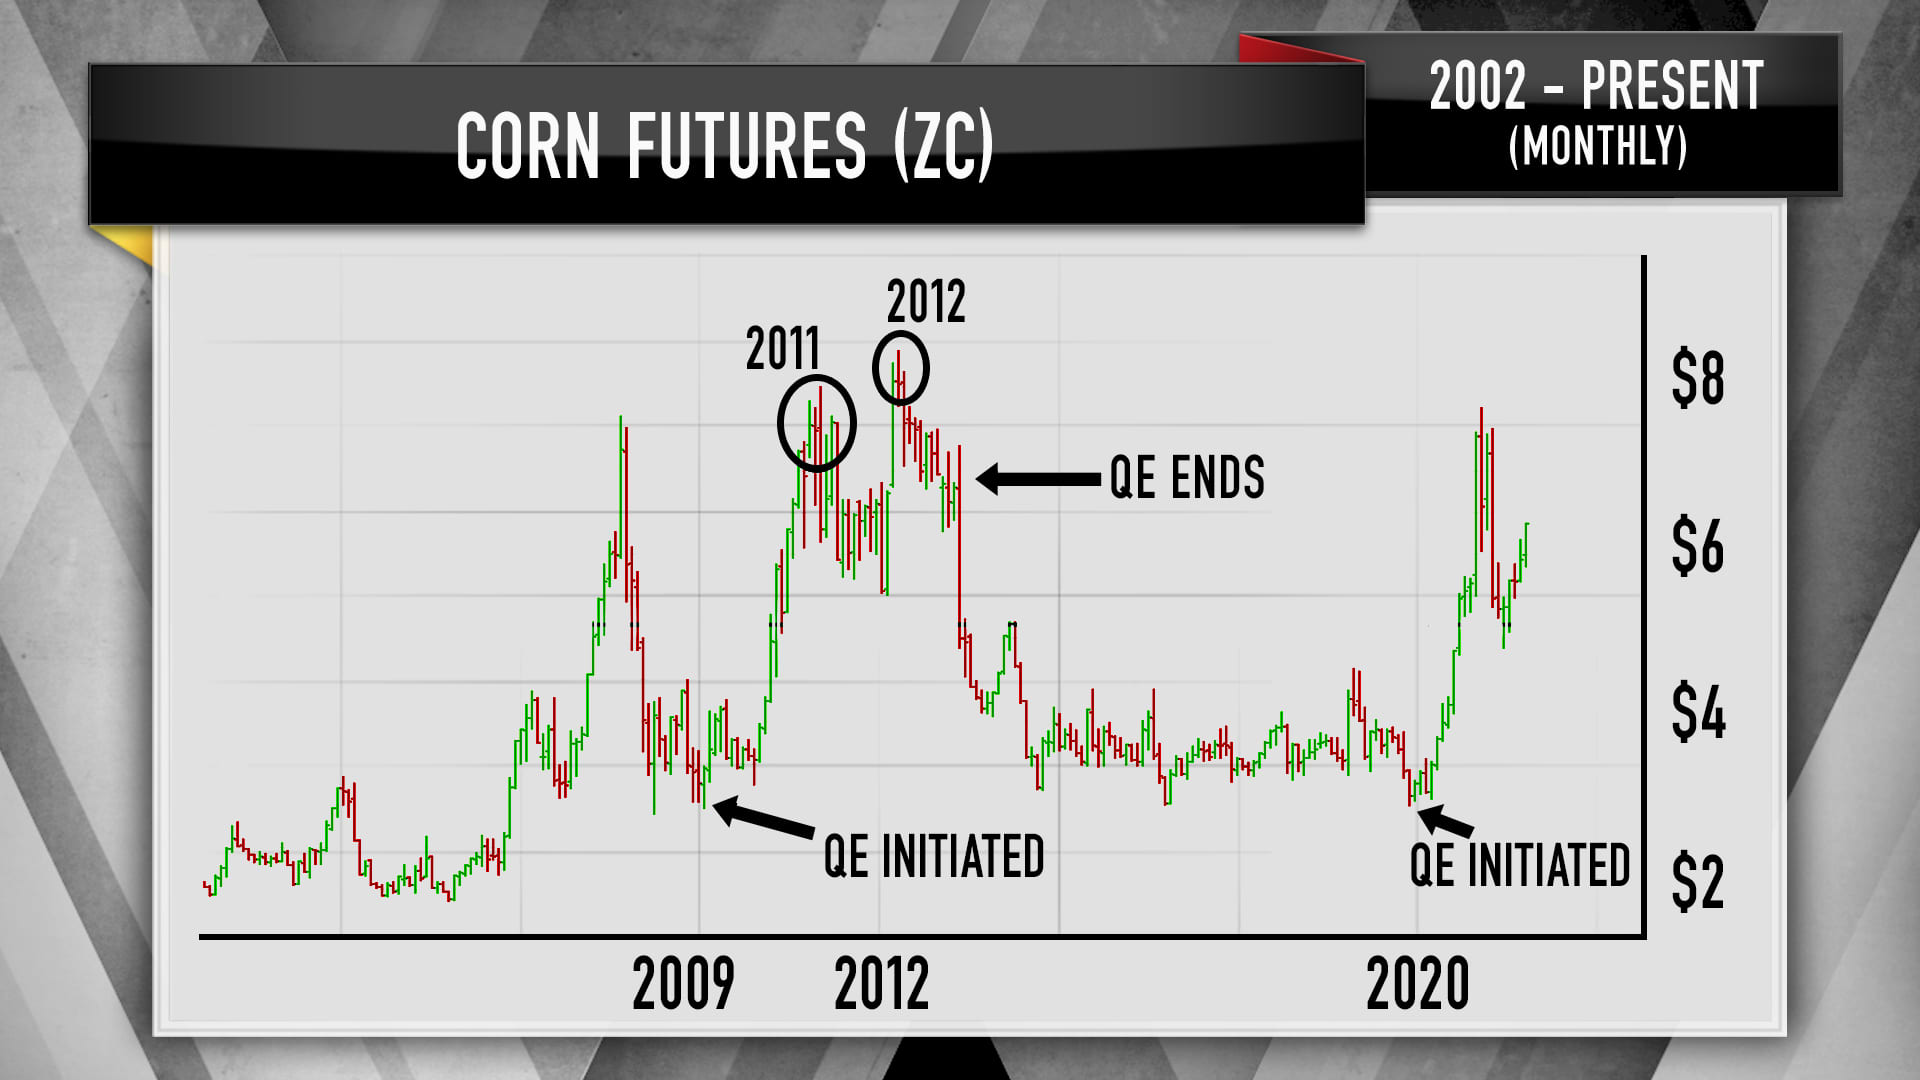 Monthly chart of corn futures for the past 20 years.